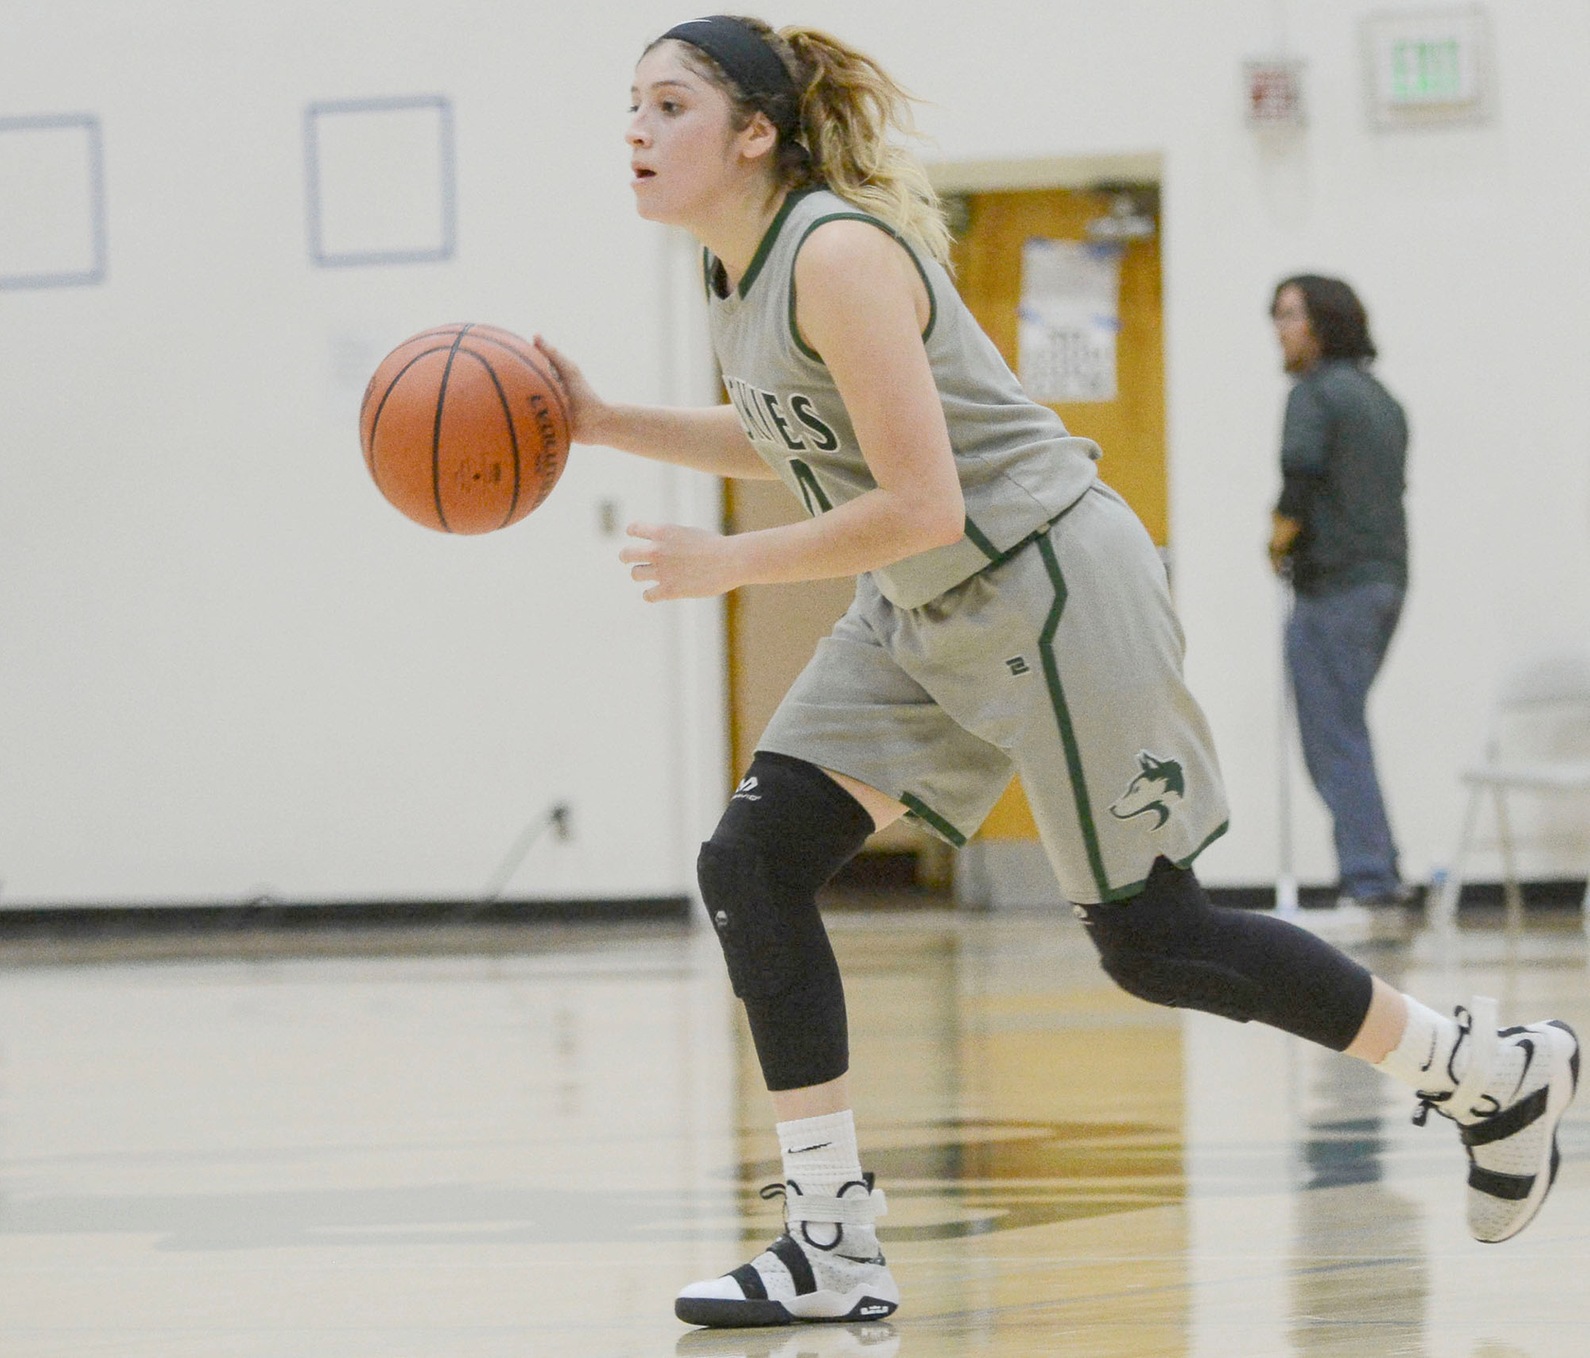 East Los Angeles college sophomore guard Allissa Gomez scored a game-high 27 points in a 70-64 overtime win vs. Pasadena City College in a CCCAA Southern California Regional third round game. (Photo by Tadzio Garcia)